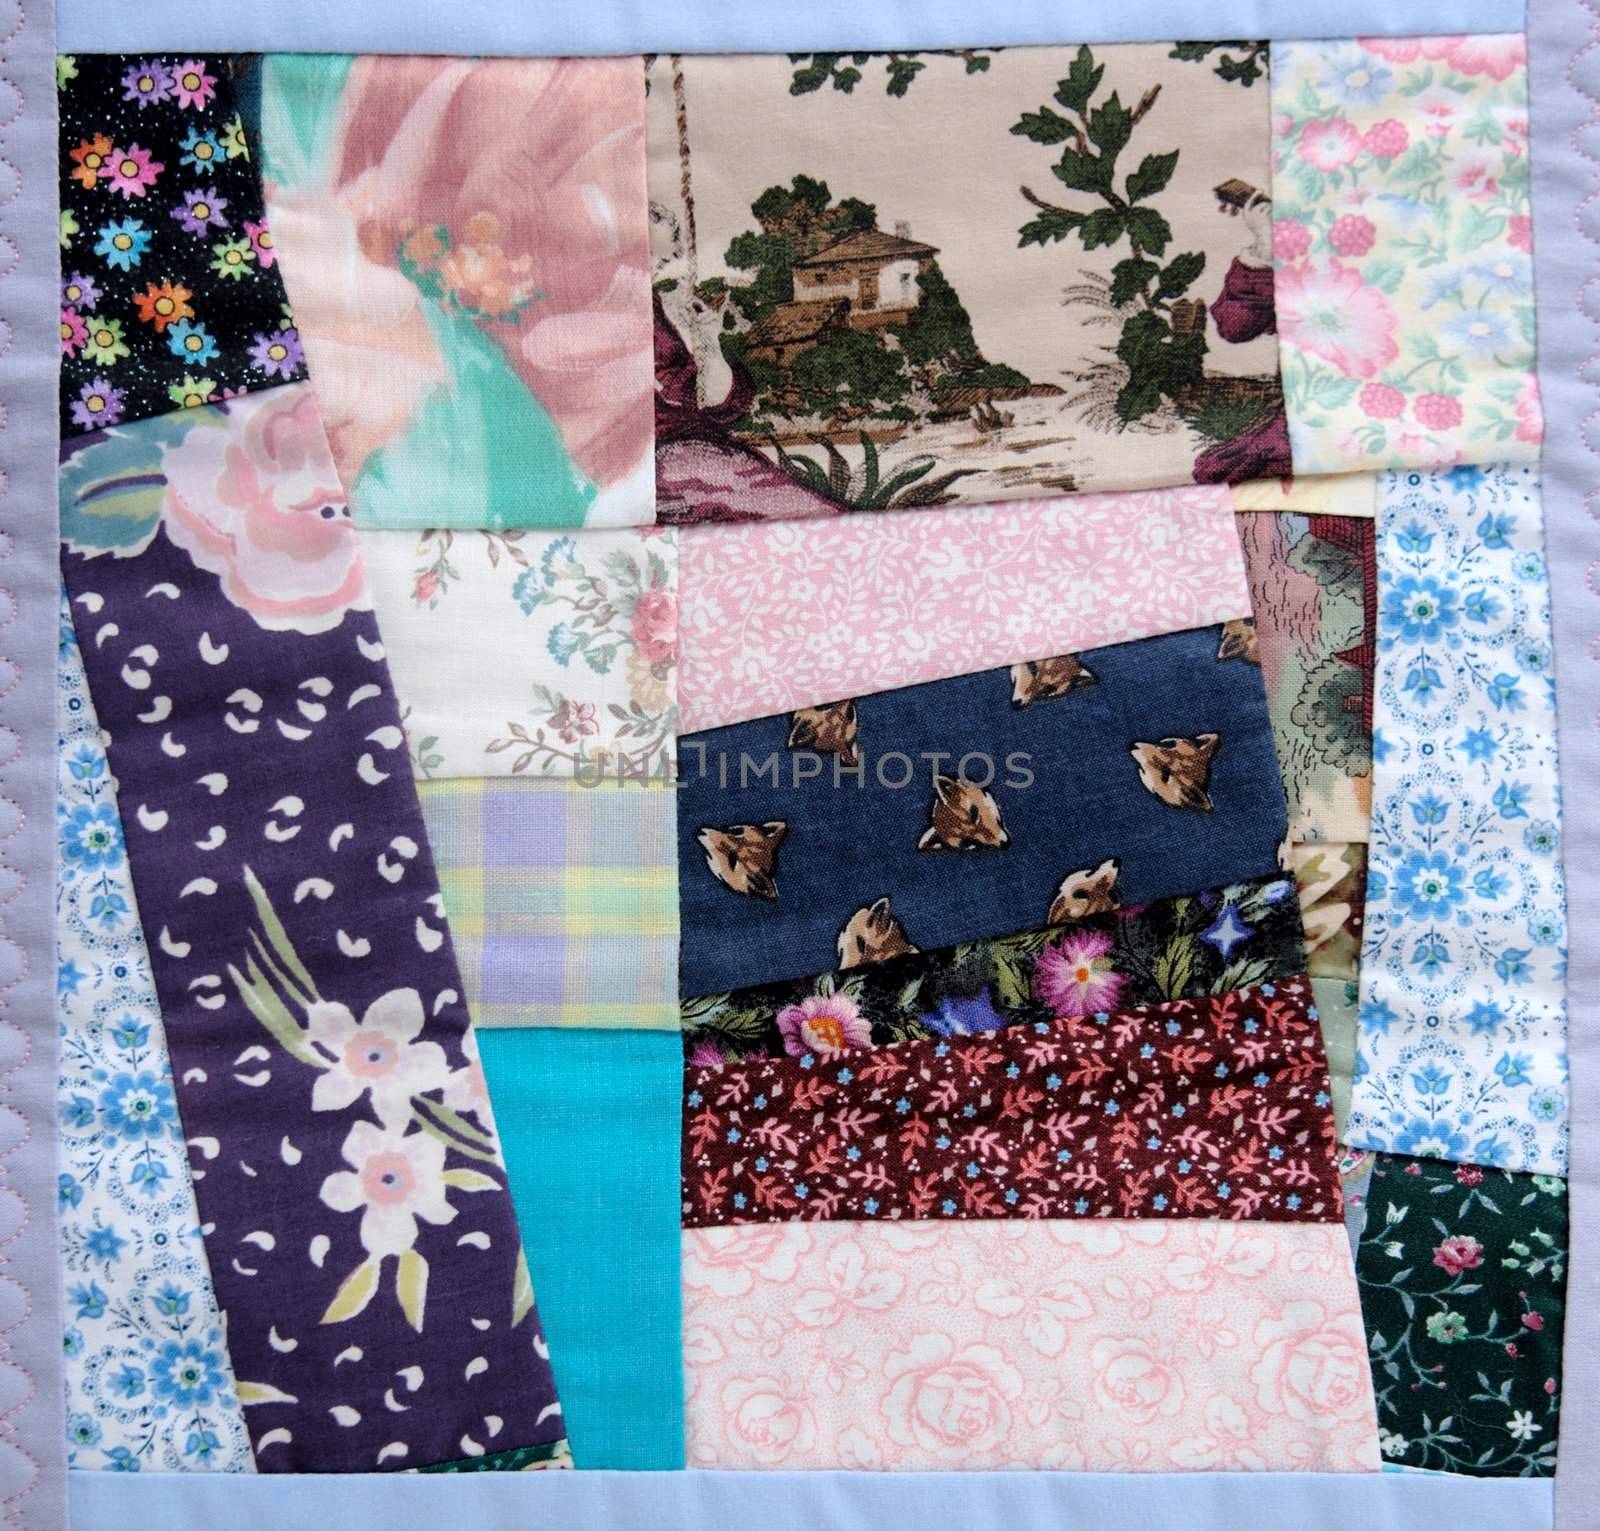 a portion of a crazy quilt with various floral and print fabrics